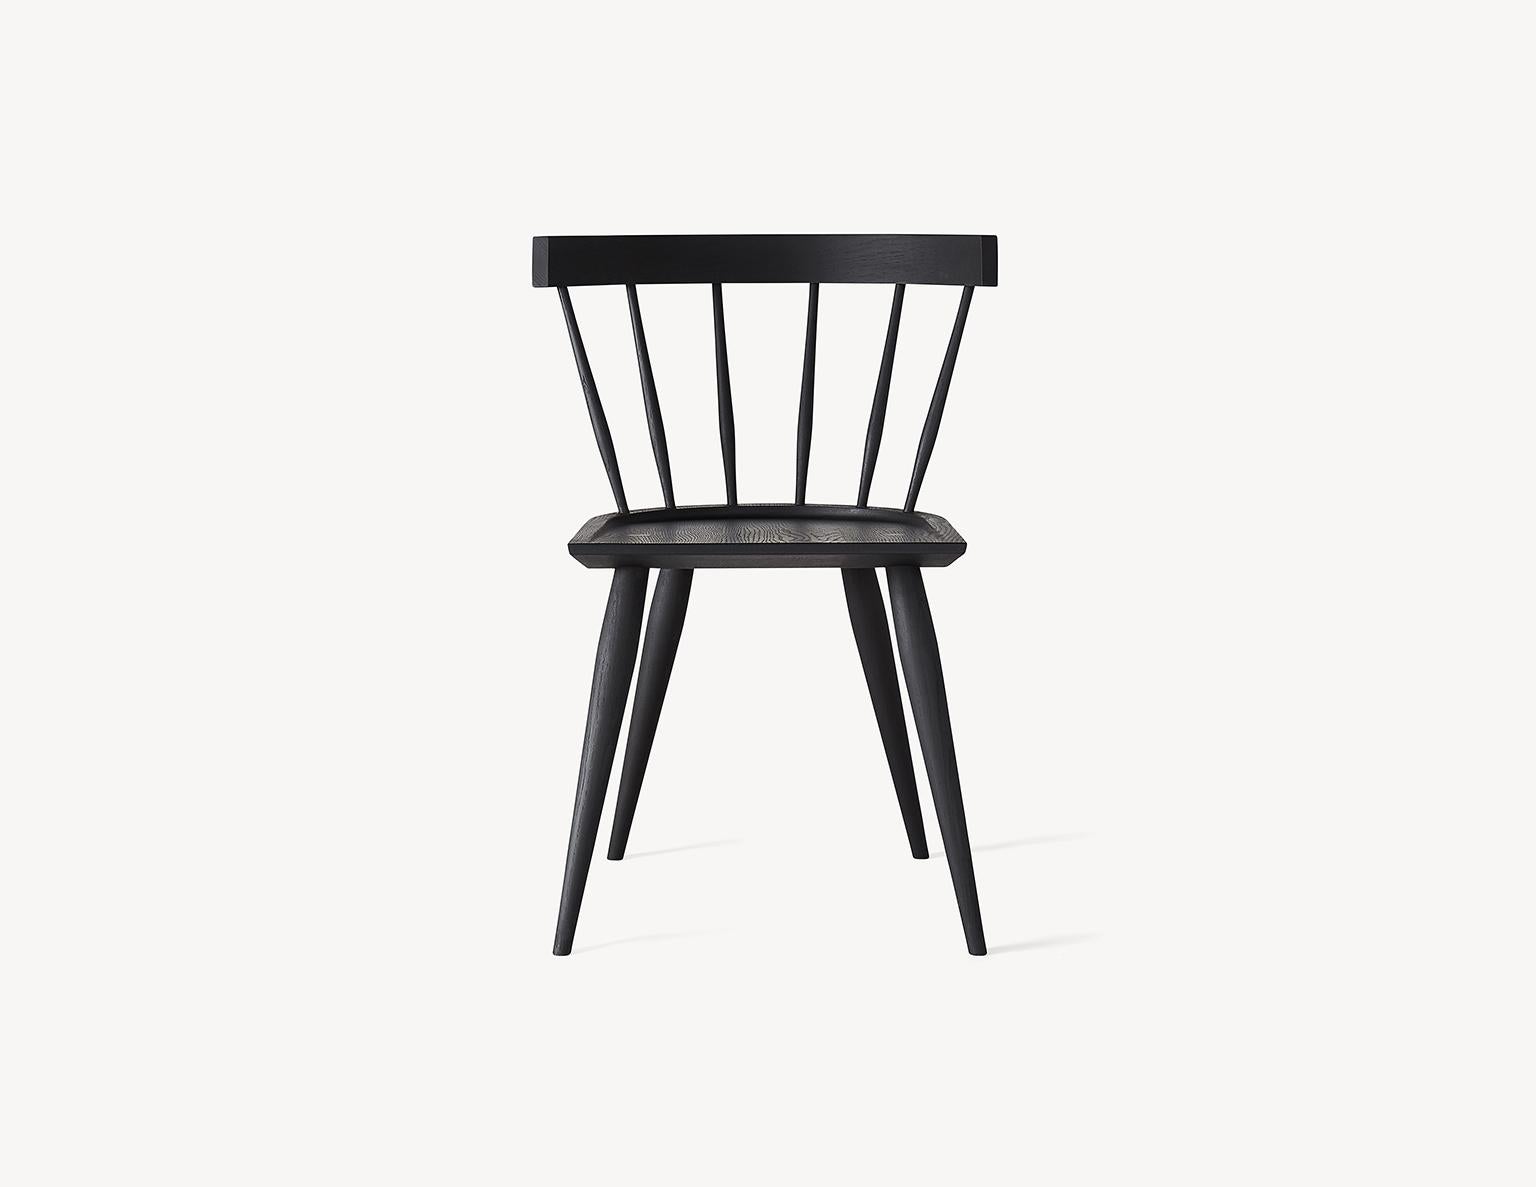 The Edwin chair is a Minimalist take on the Classic Windsor chair, making it a versatile seating option for any space. Made of select white oak with a hand rubbed black or white (no VOC) oil finish. Each chair is handcrafted and features a deep,